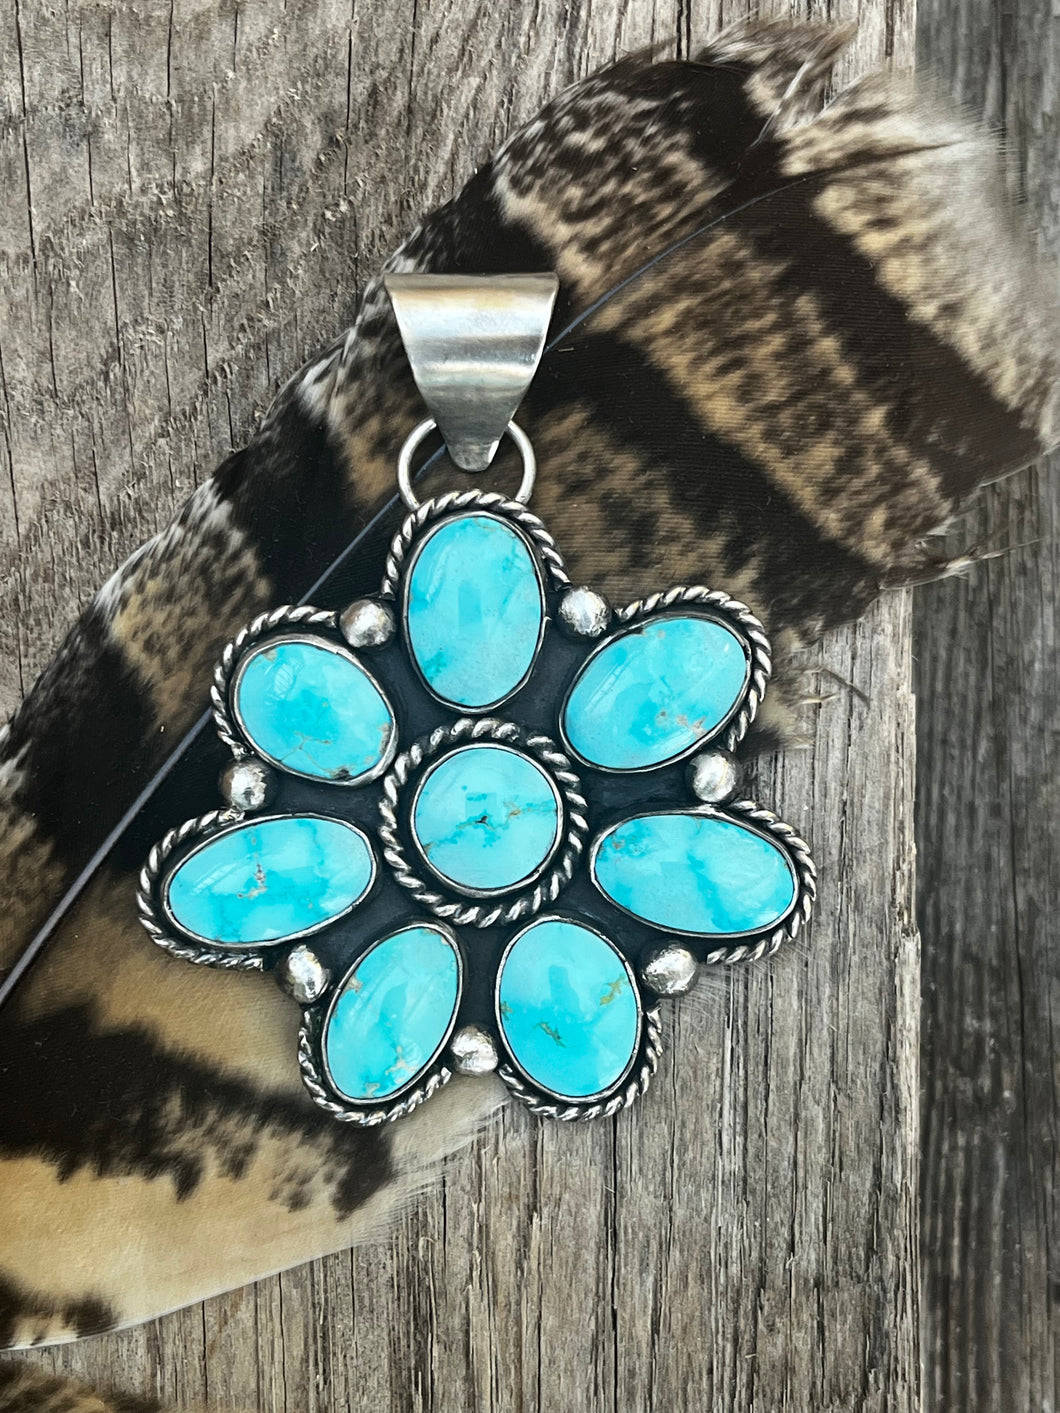 Natural Campitos Turquoise (8 pieces) set in sterling silver accented with twist wire and silver balls,.  This cluster pendant was handmade by Taylor Made Silver.